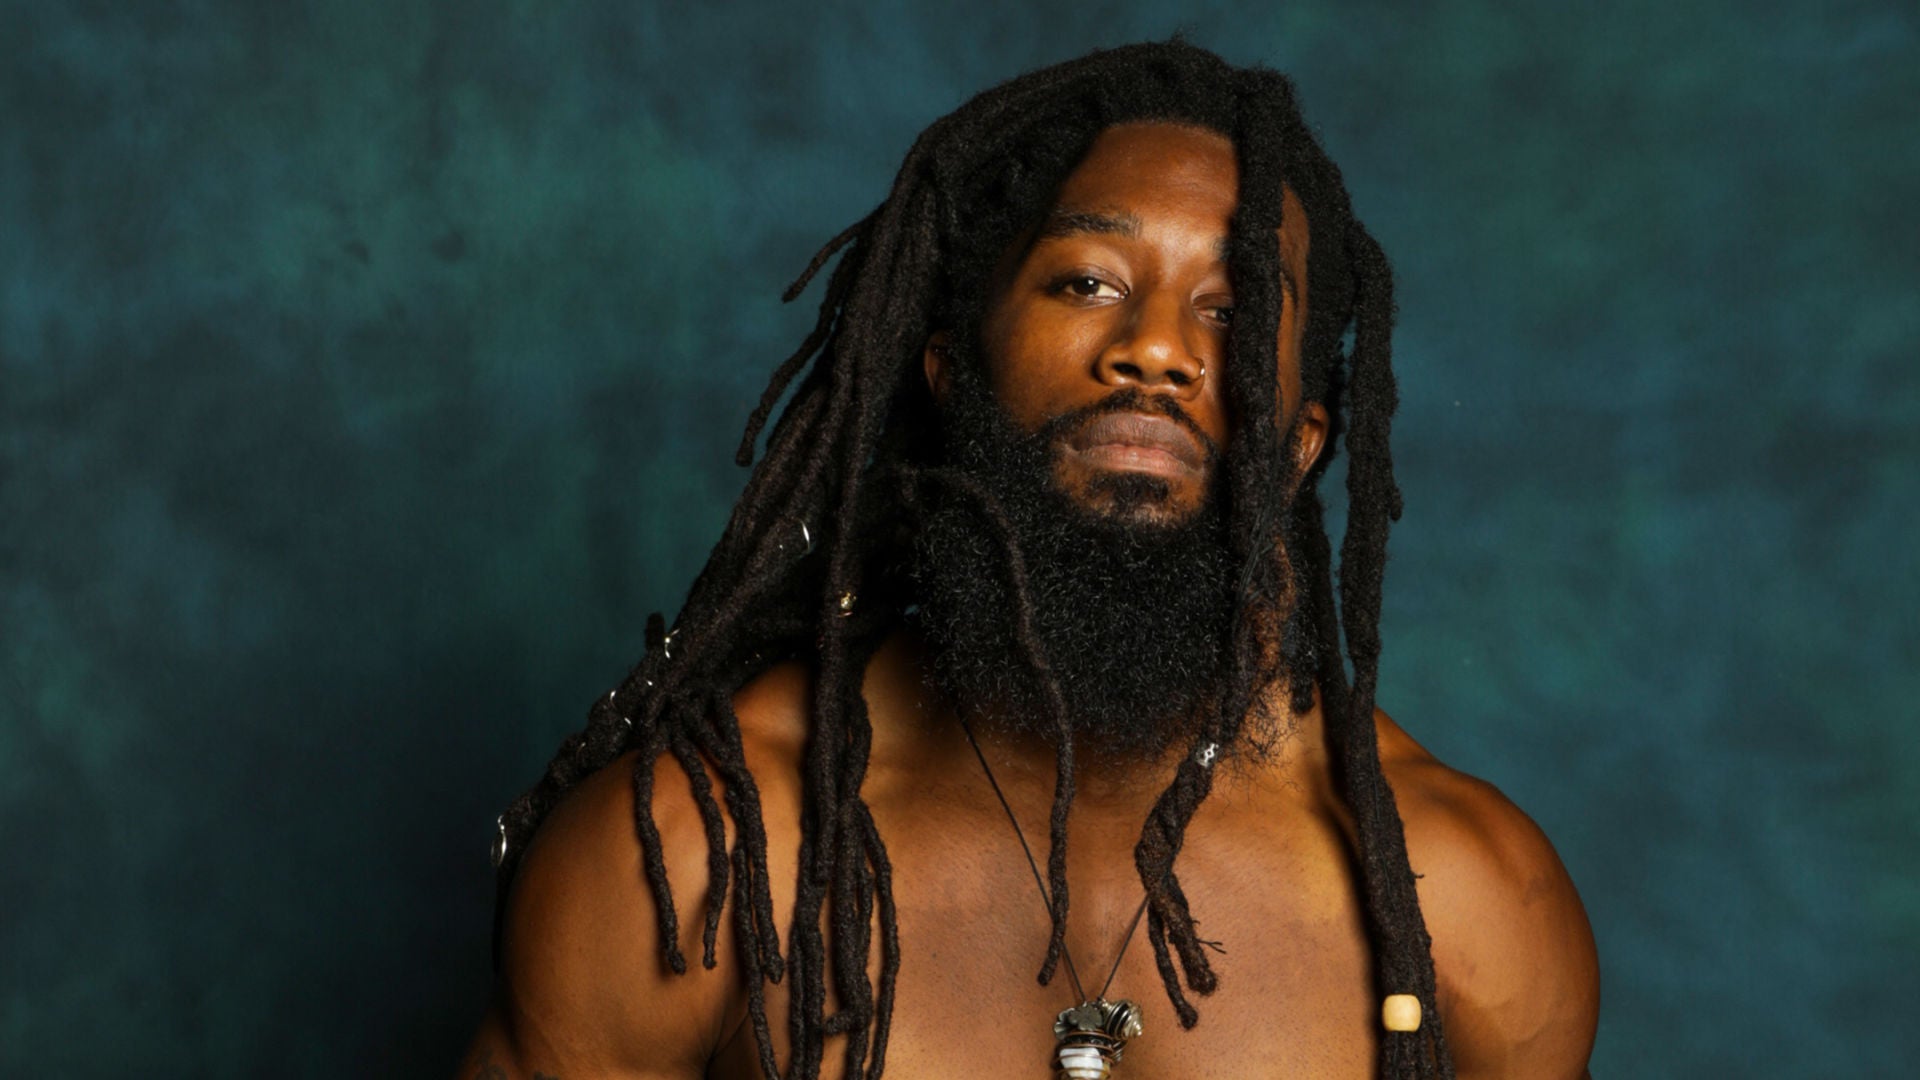 Shirtless Men Plus ESSENCE Festival Equaled Pure Heaven For The Ladies